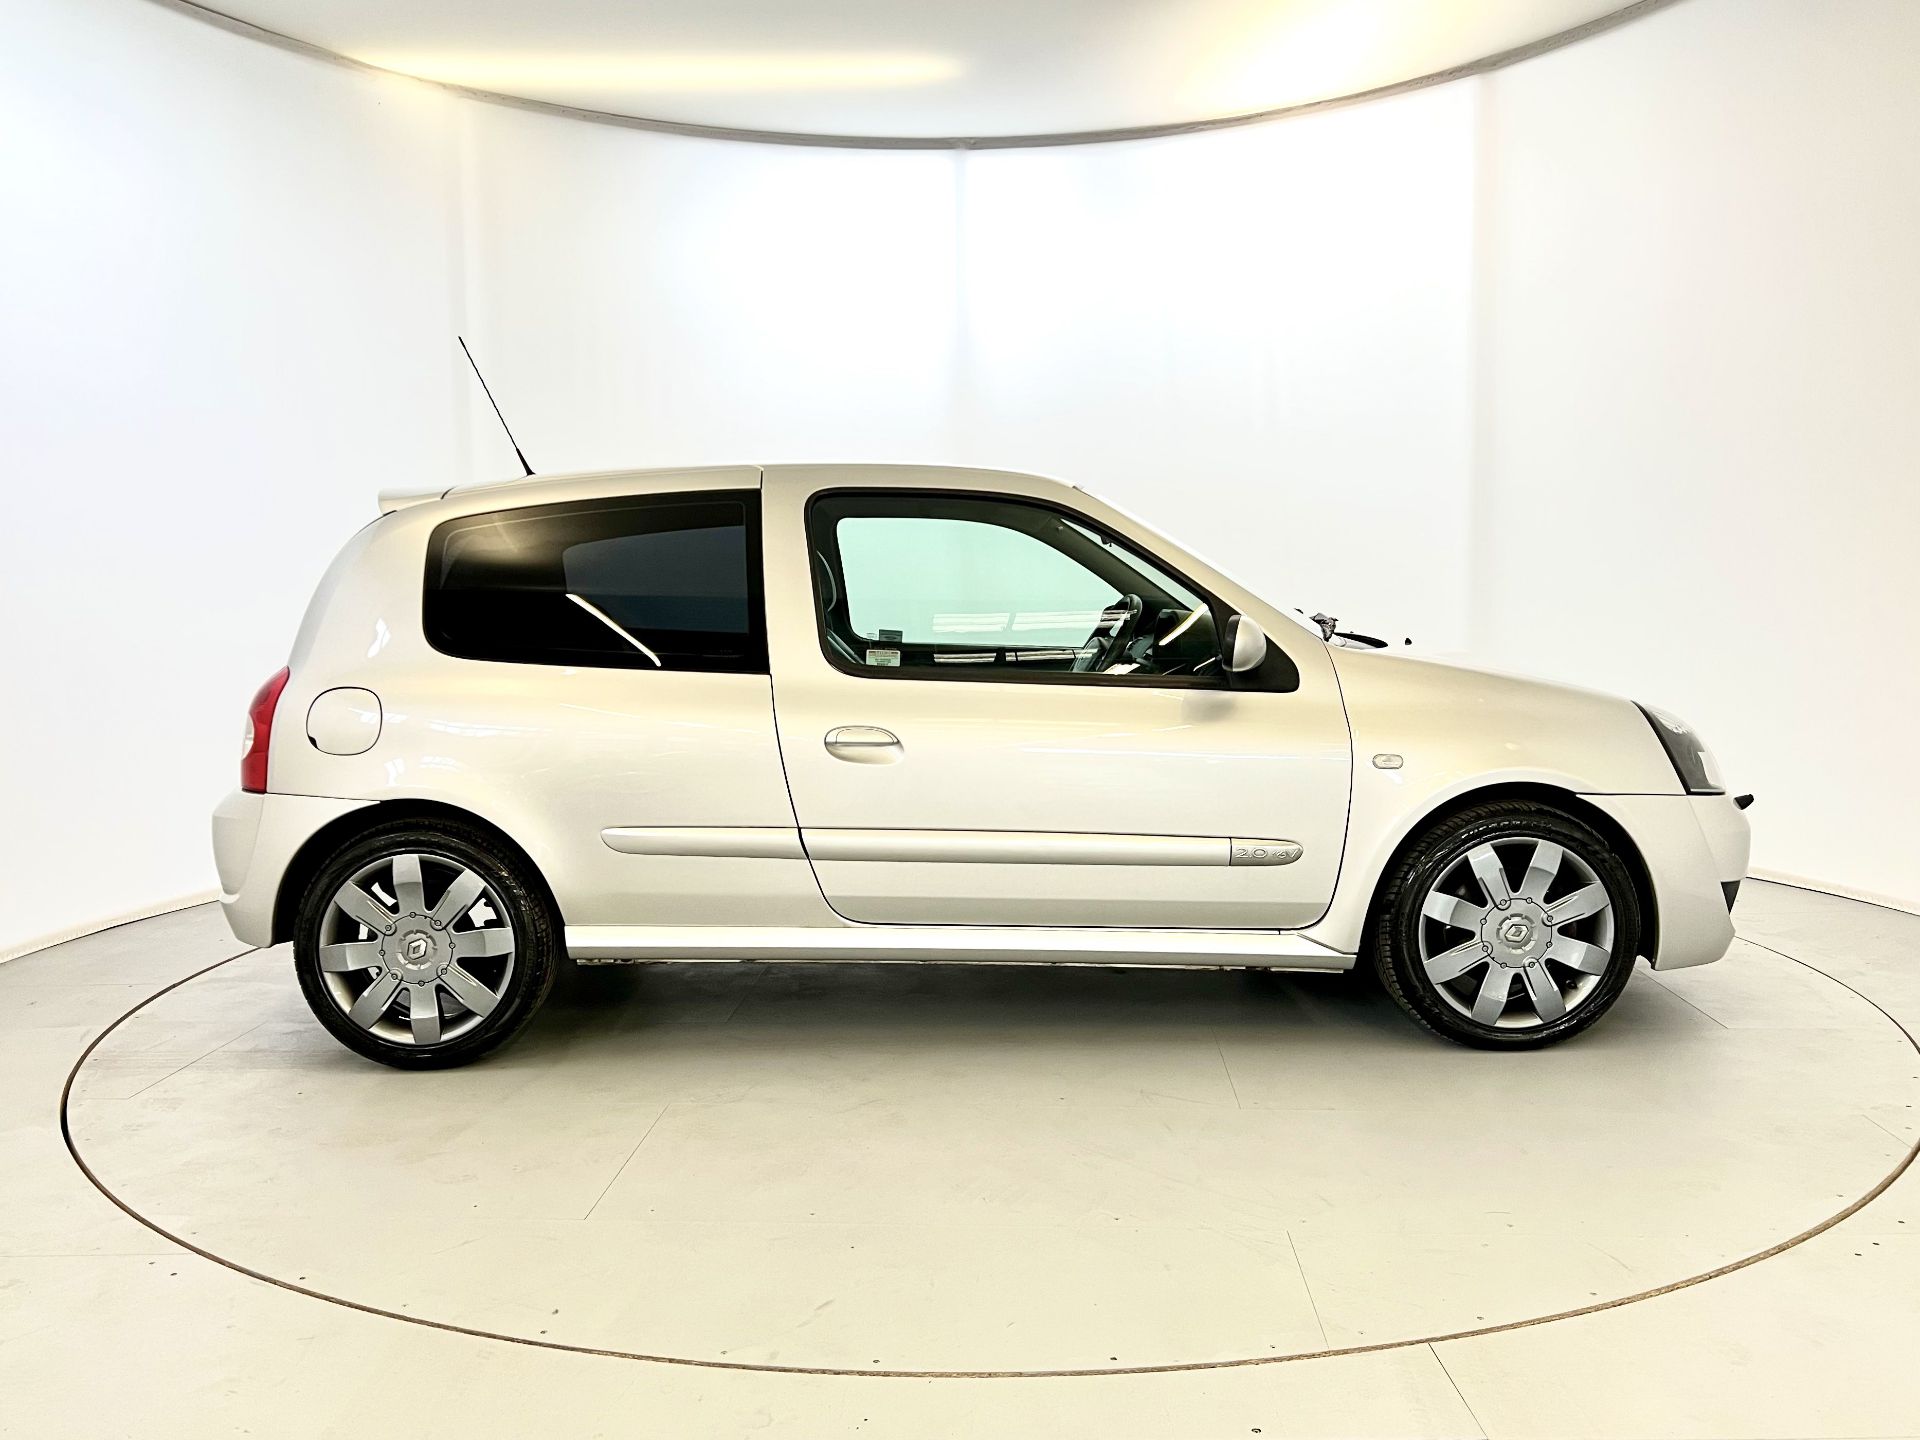 Renault Clio 182 Cup - Image 11 of 31